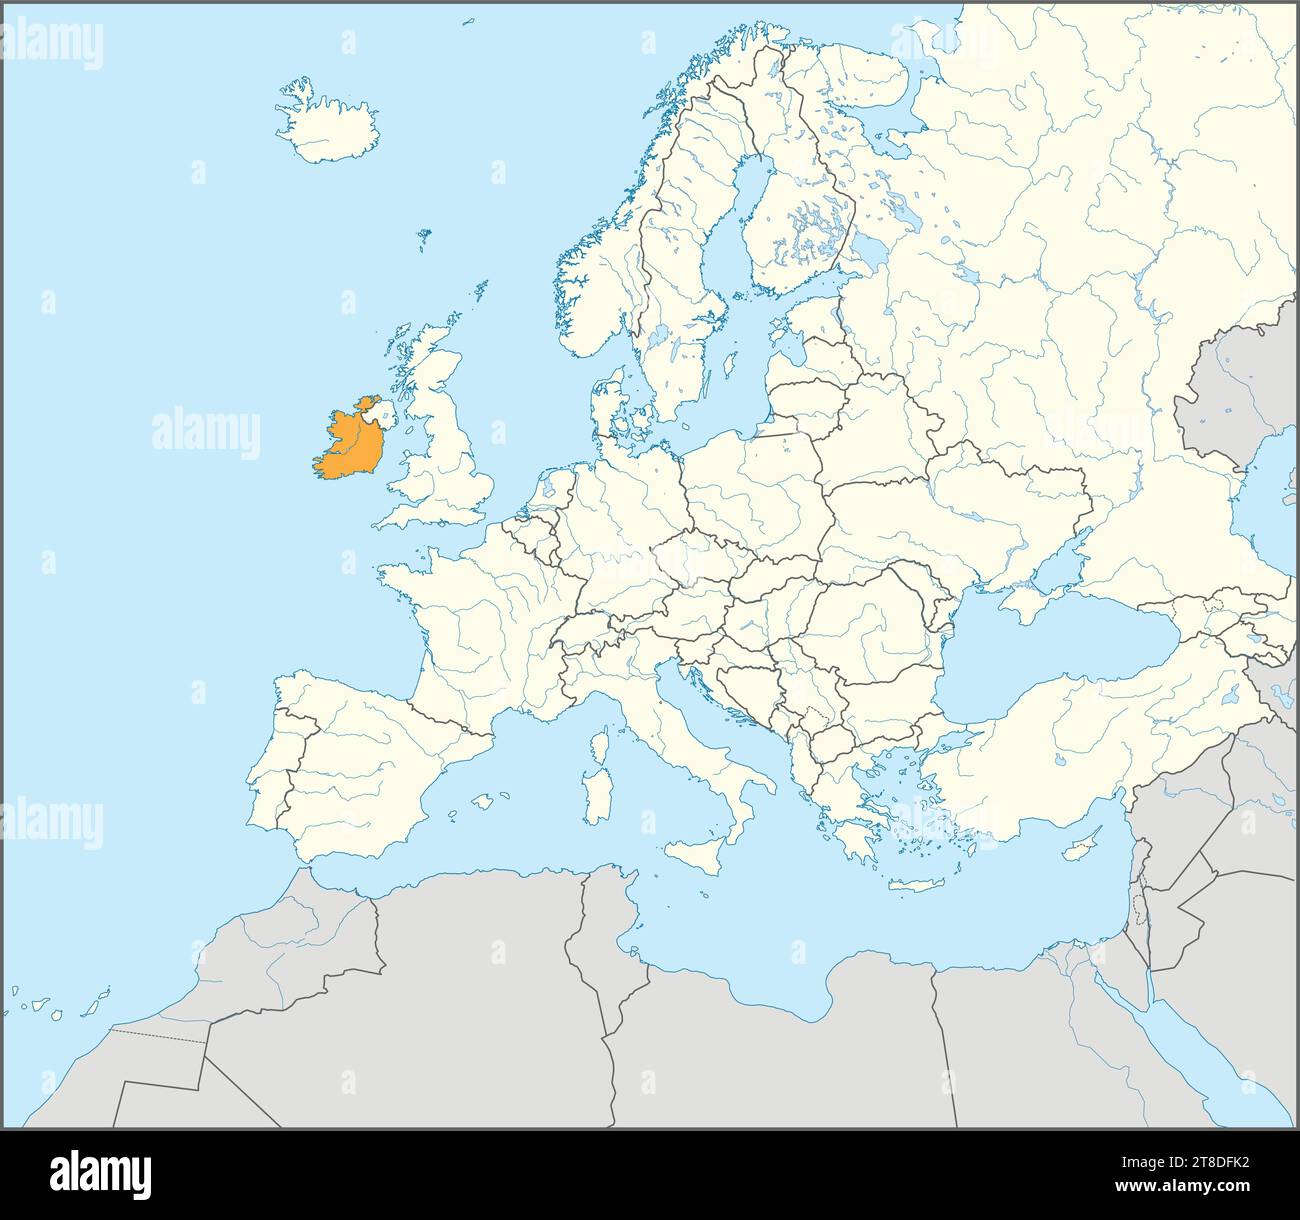 Location map of the REPUBLIC OF IRELAND, EUROPE Stock Vector